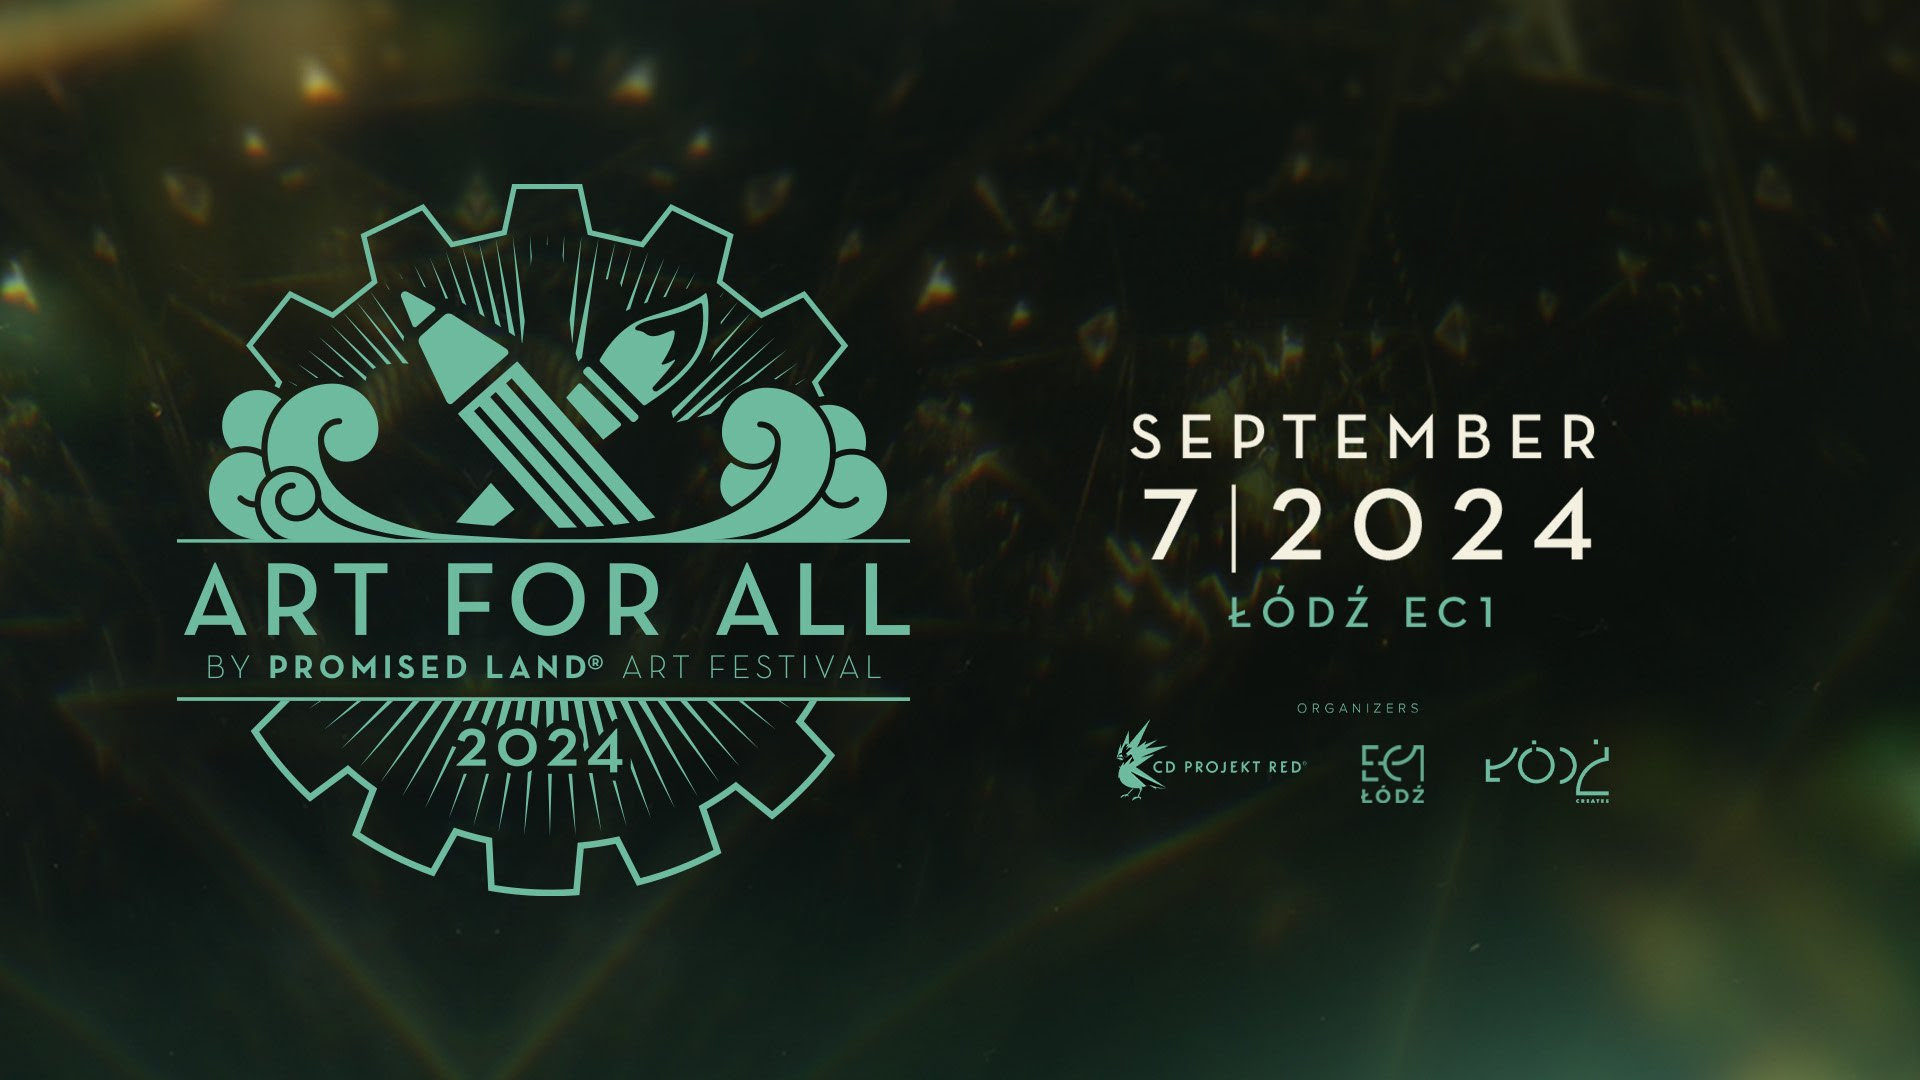 The logo and date for Art for All